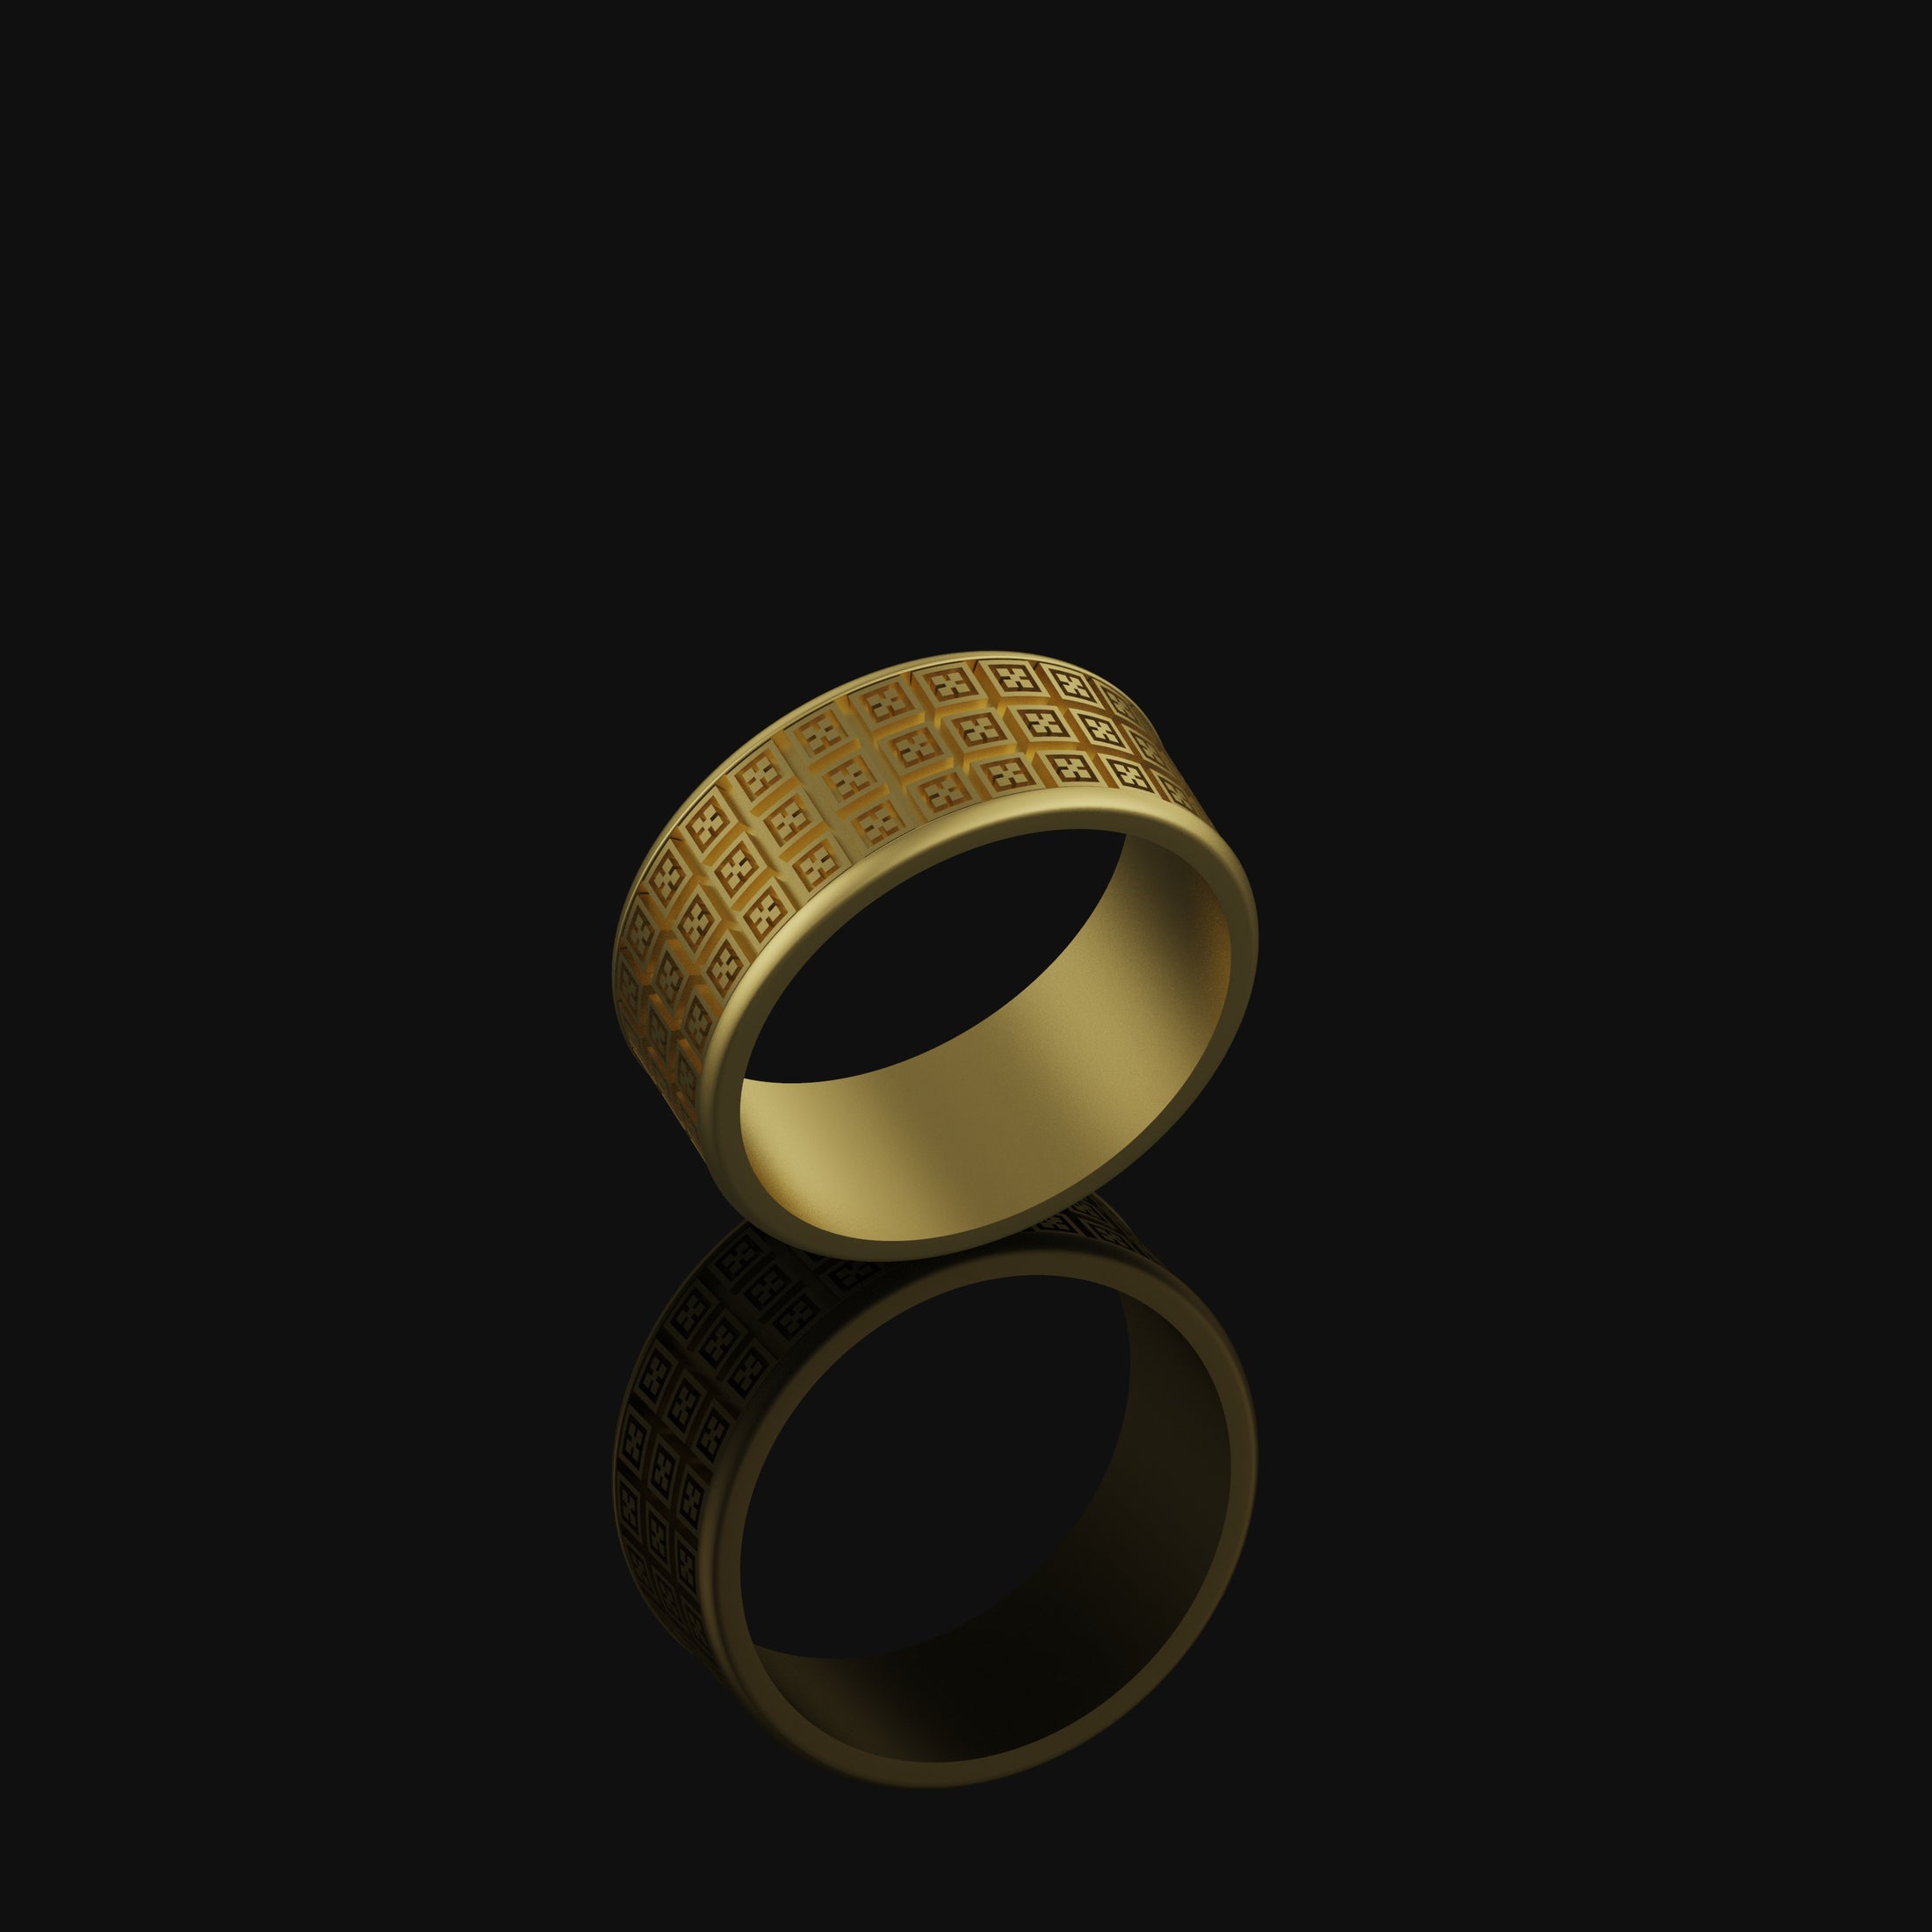 X Cross Band - Engravable Gold Finish